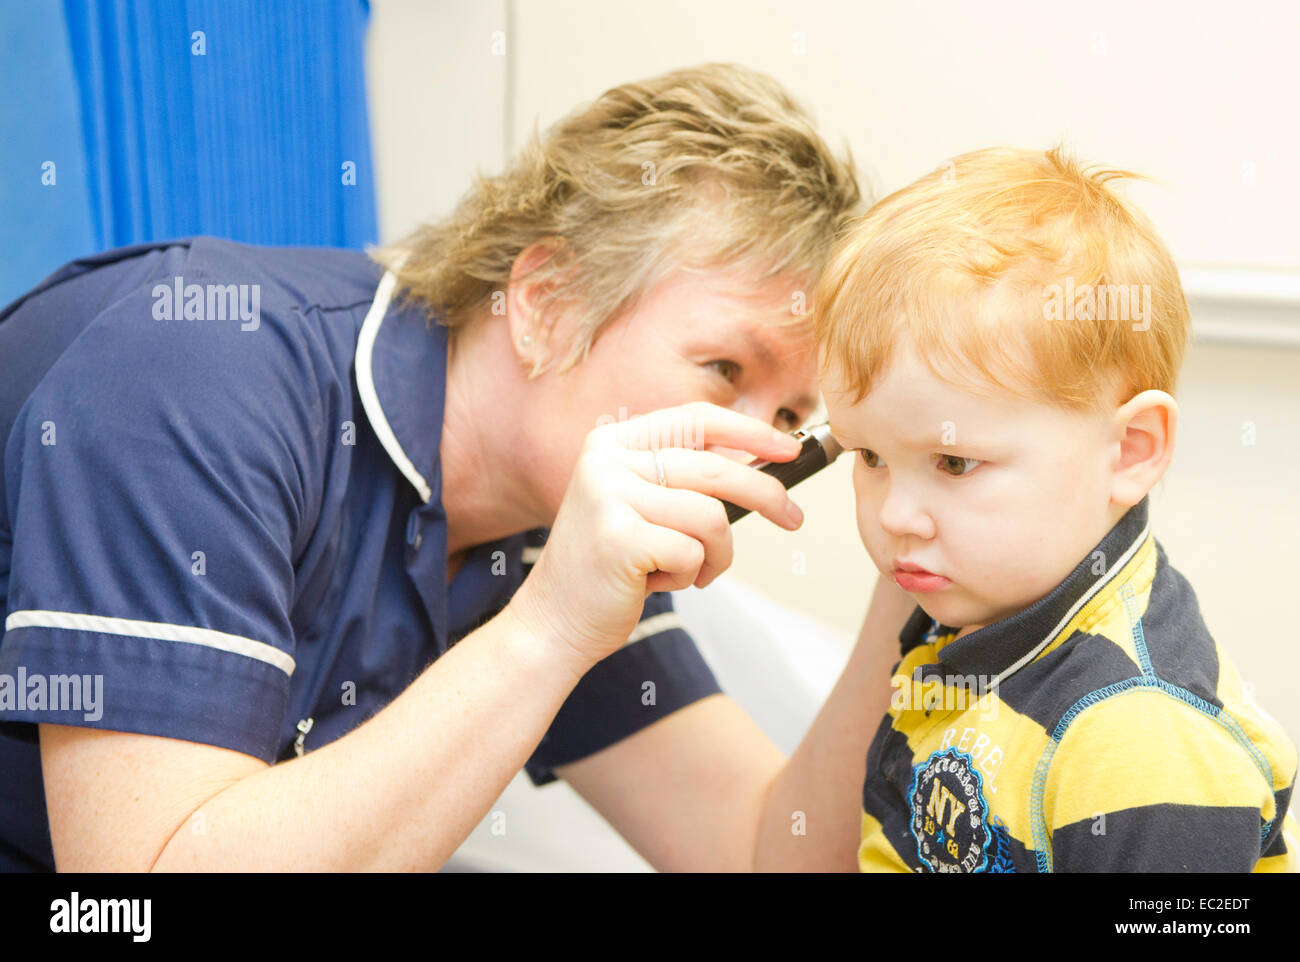 A little boy at the doctors surgery having a check up Stock Photo